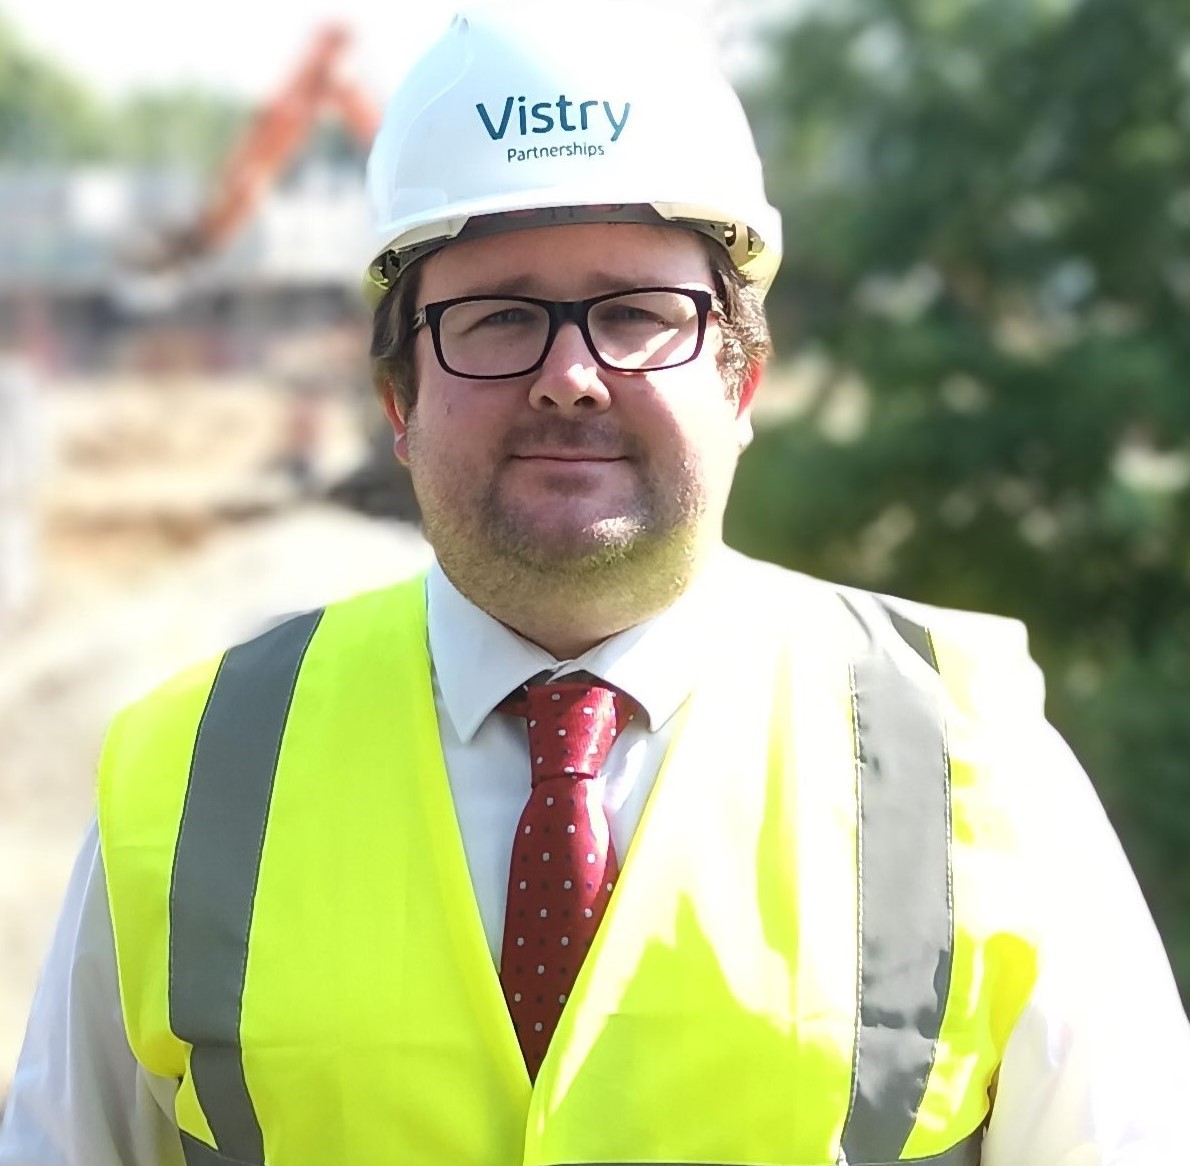 a man in a shirt and tie and site safety clothing smiling at the camera